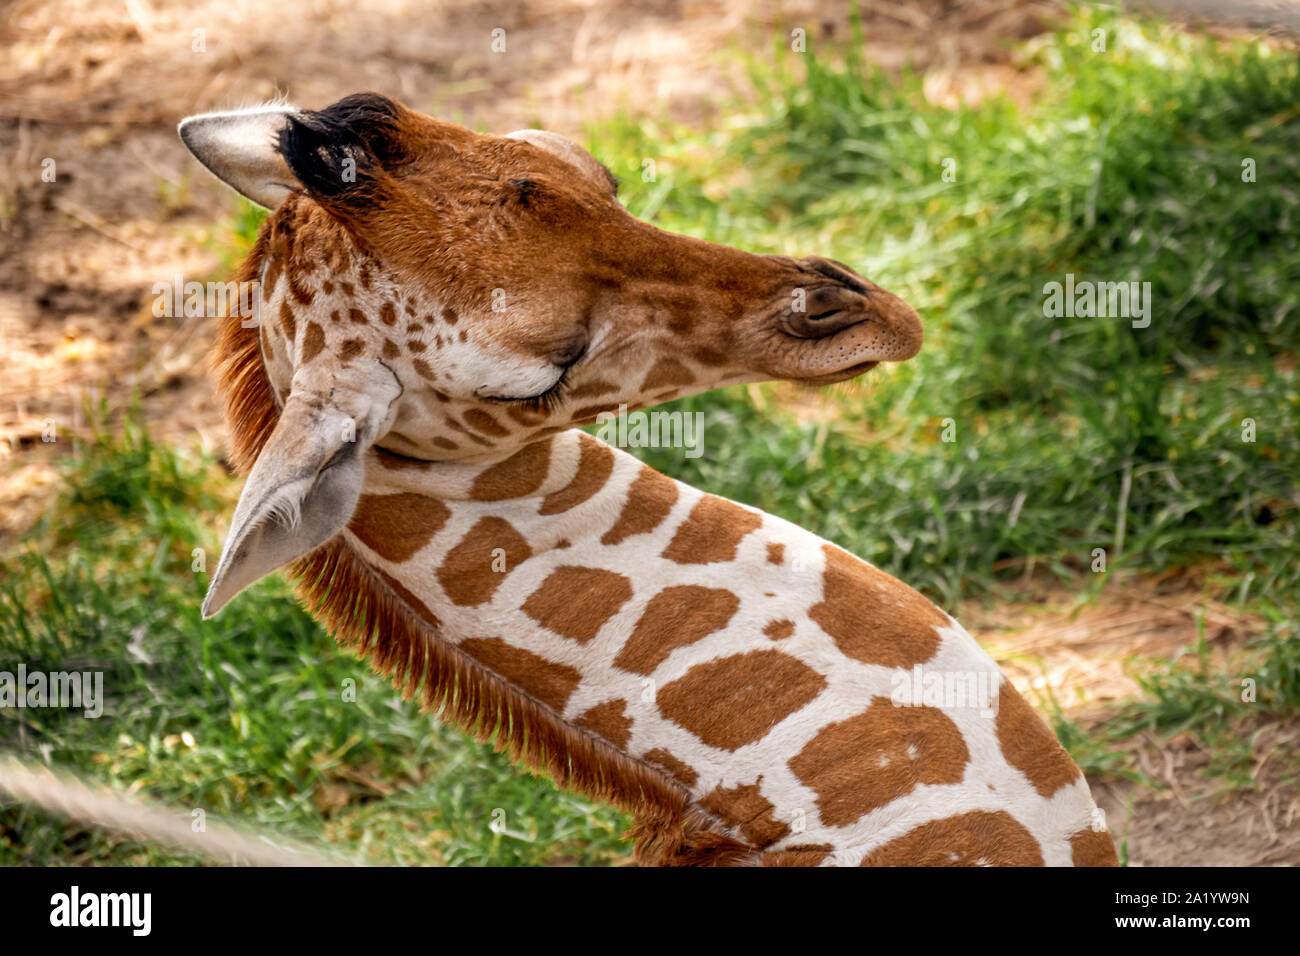 Lovely young Giraffe sleeping at the zoo Stock Photo